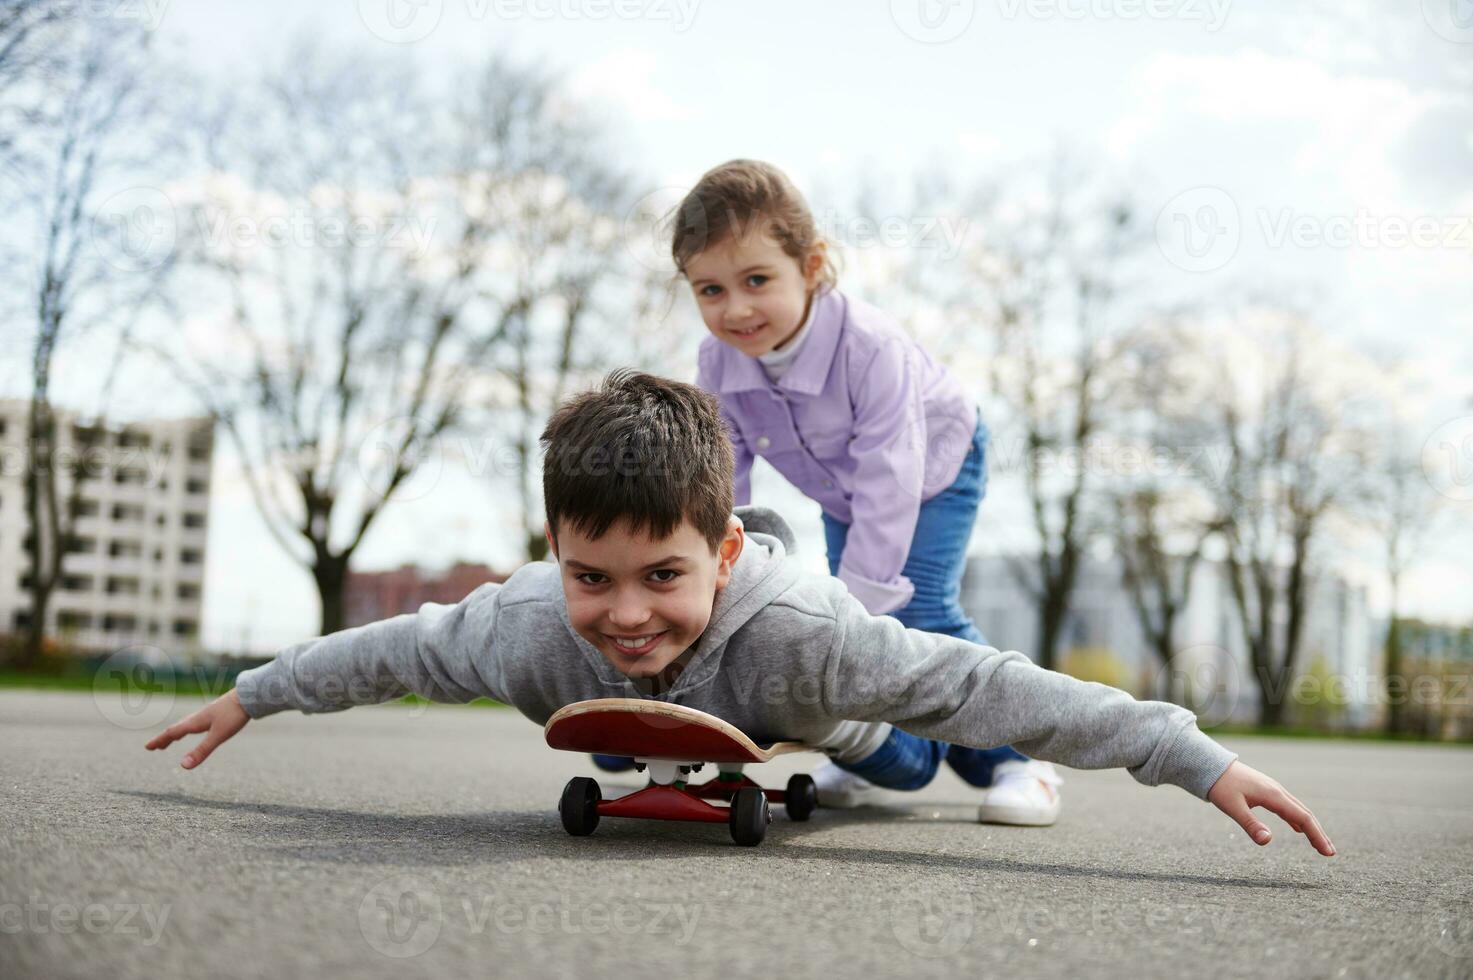 Smiling girl riding her brother on a wooden skateboard enjoying a game together on a sports ground photo